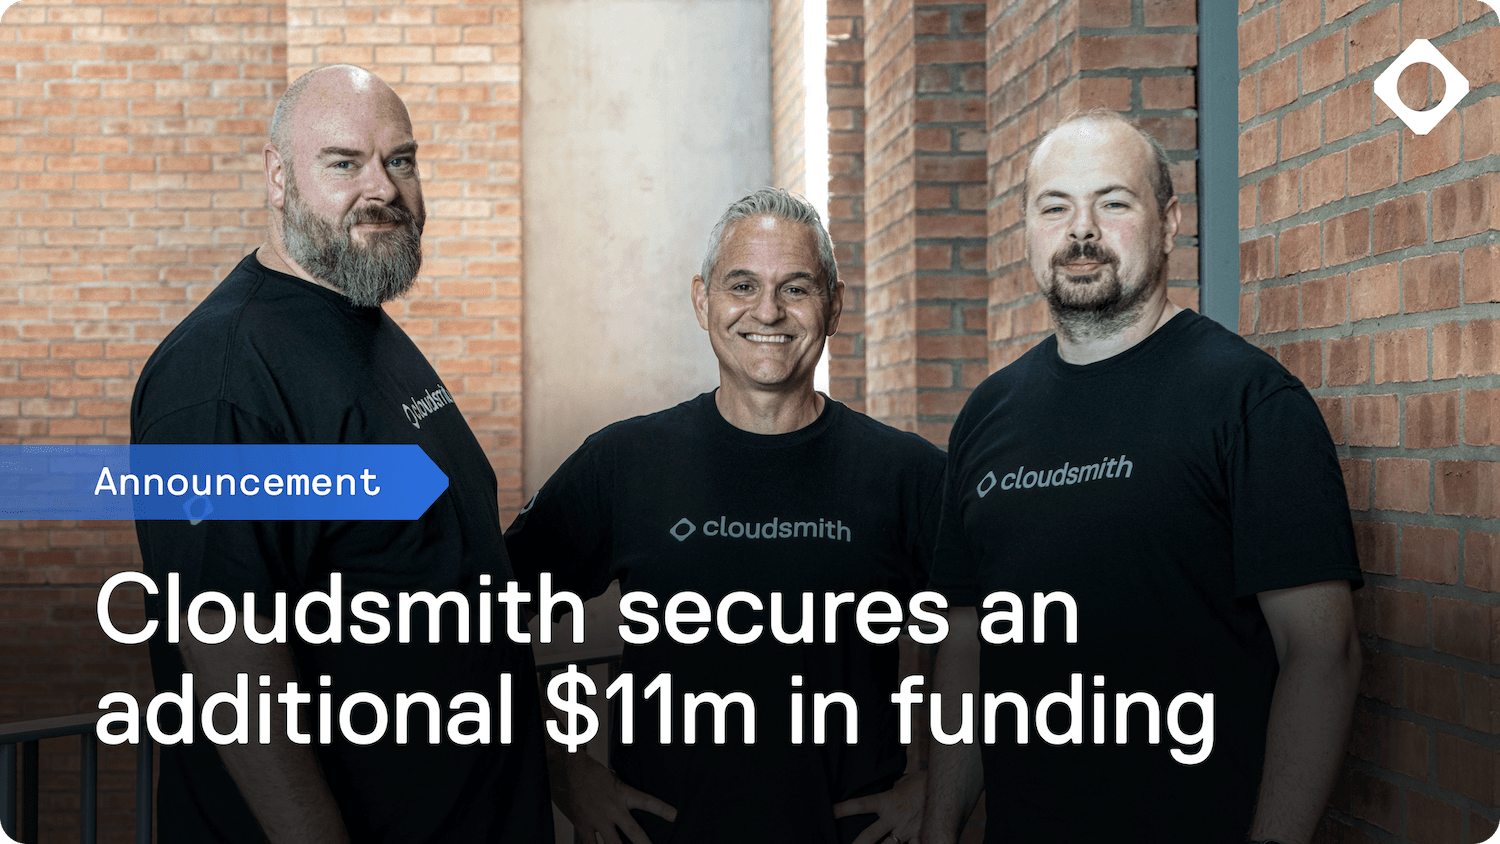 Cloudsmith CEO Glenn Weinstein with Cloudsmith co-founders Alan Carson and Lee Skillen